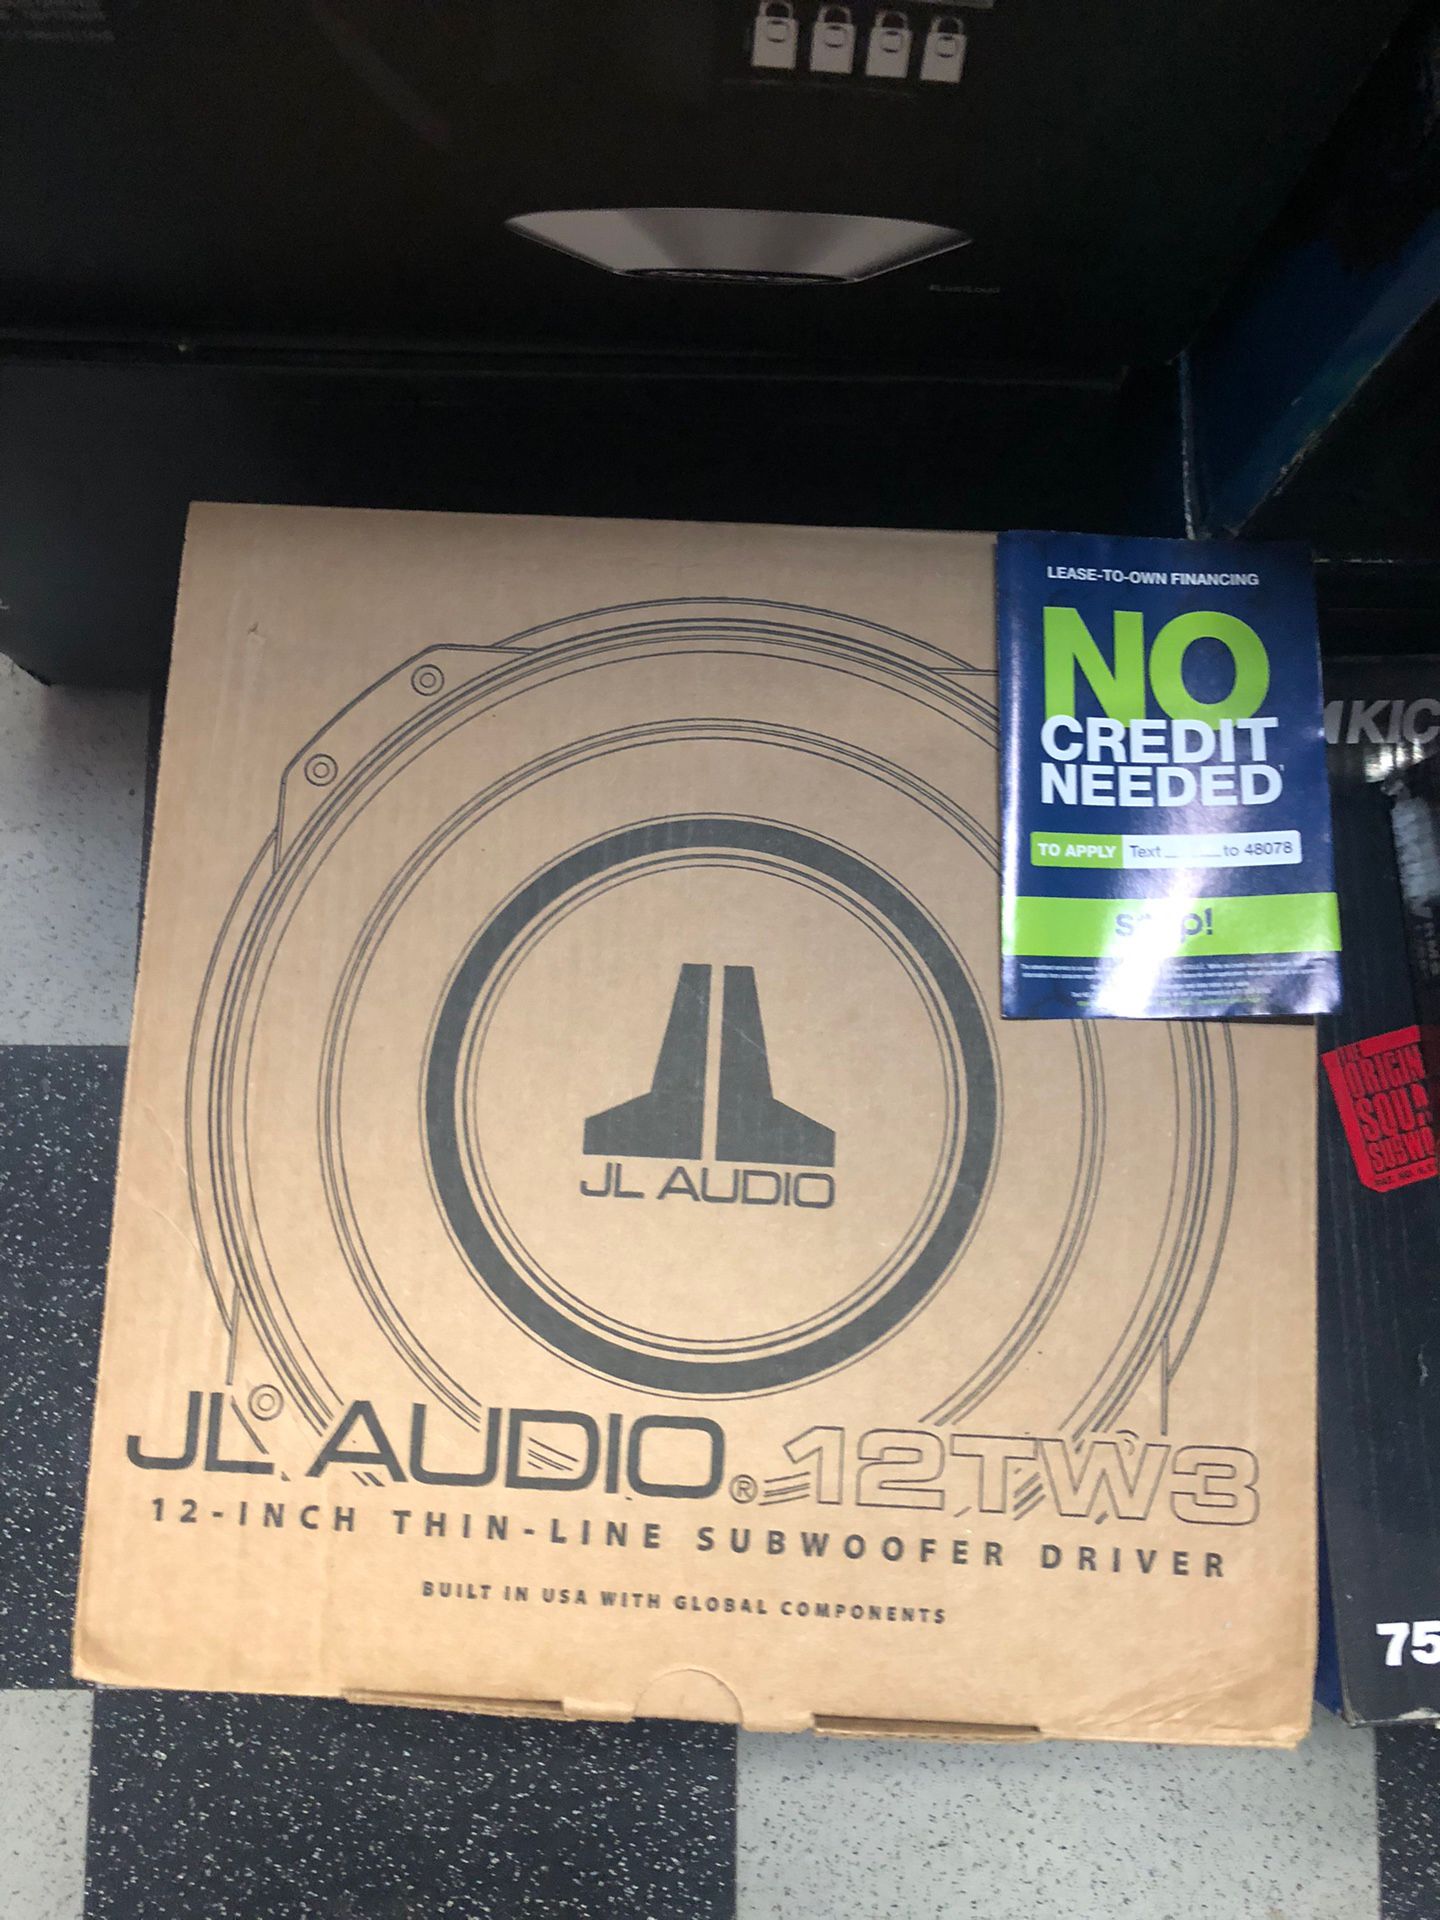 Jl Audio 12tw3 On Sale Today for 375 